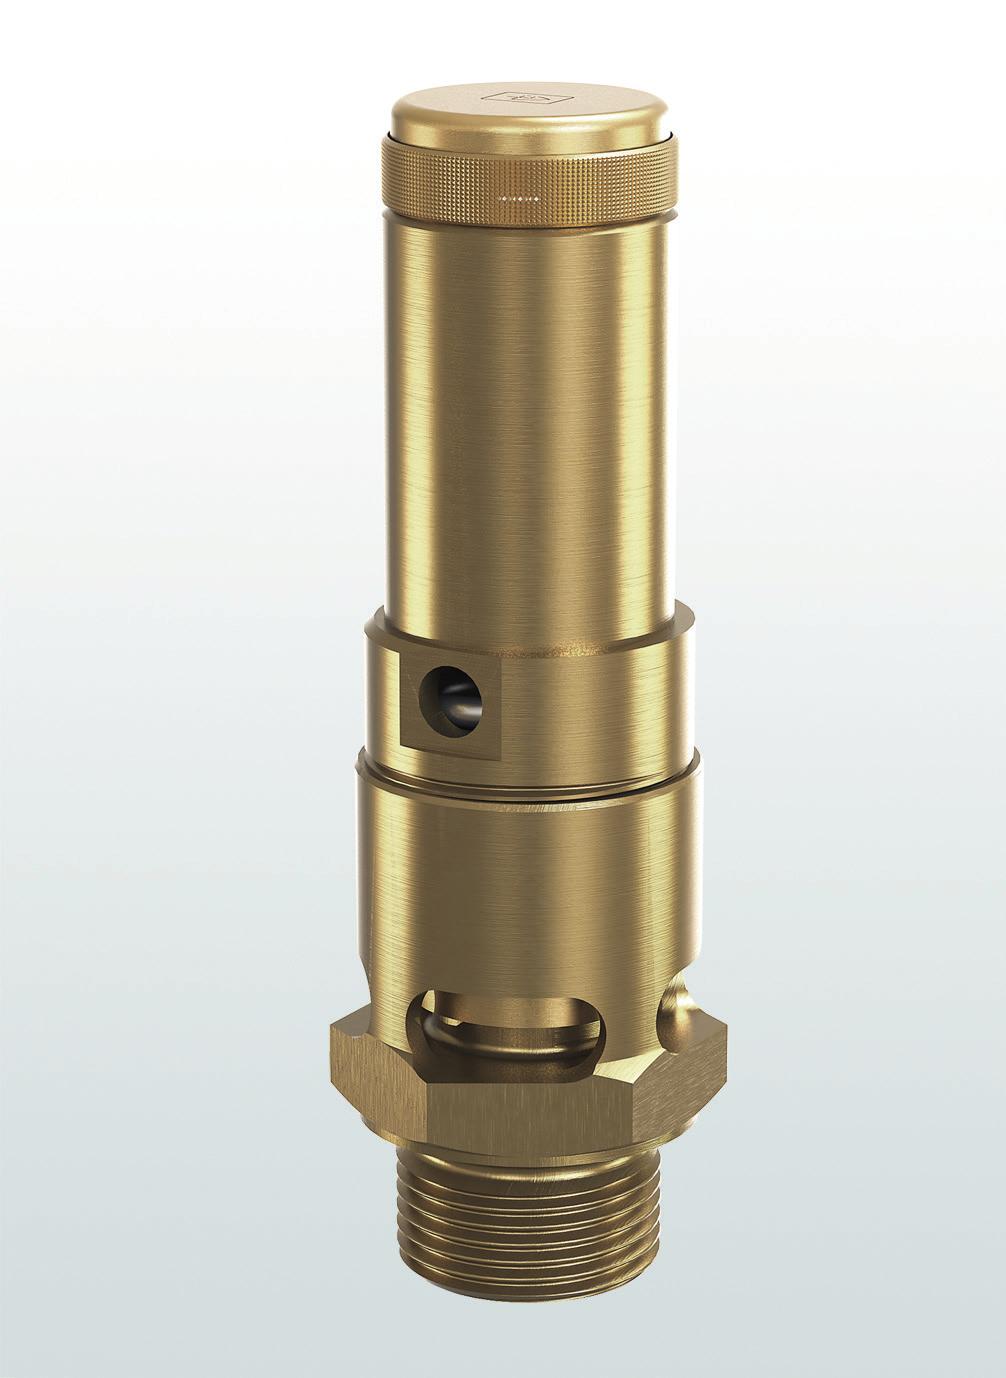 Type test approved atmospheric discharge safety valves for industrial applications Series 8 4.